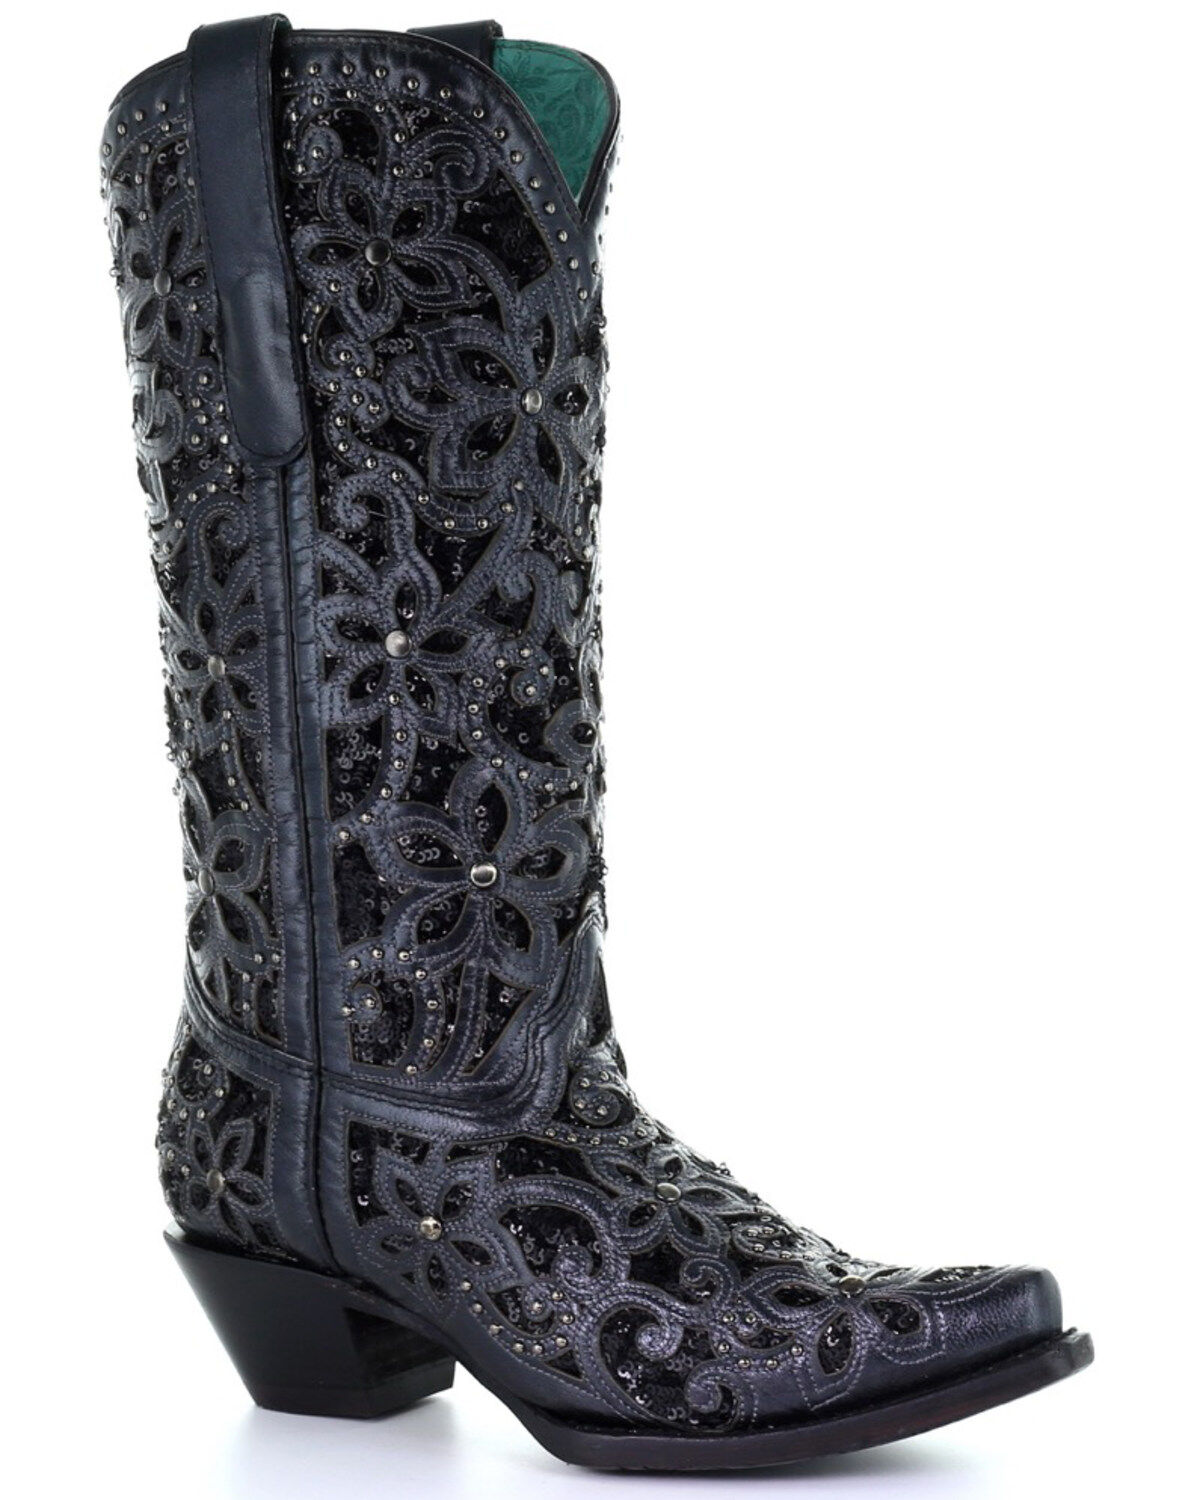 Women's Corral Boots - Boot Barn